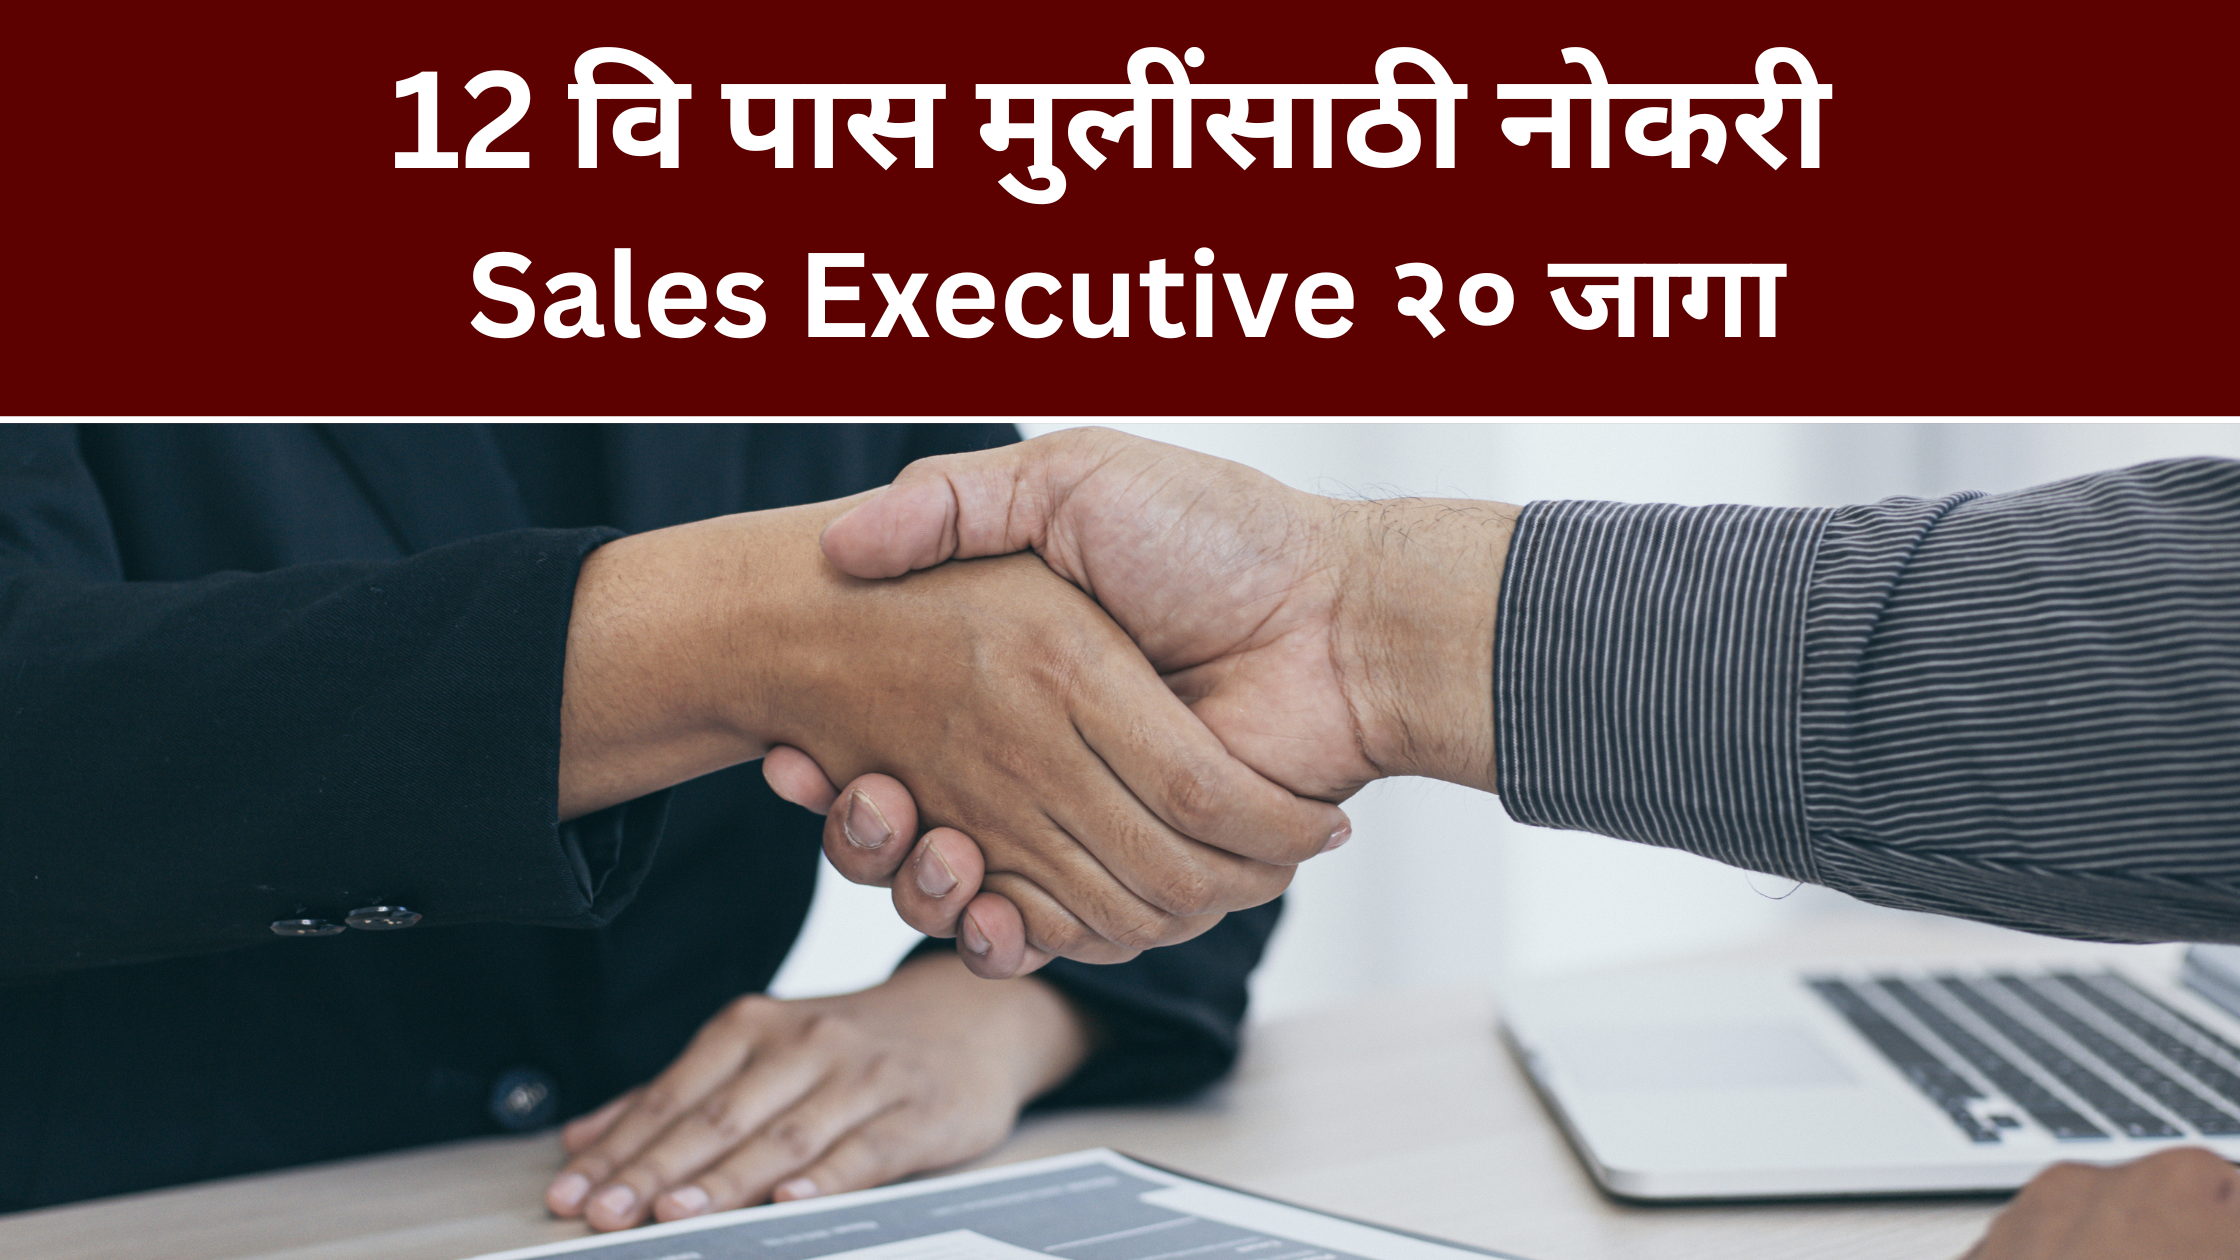 Cygnisys Services Recruitment of Sales Executive in Vanwadi!